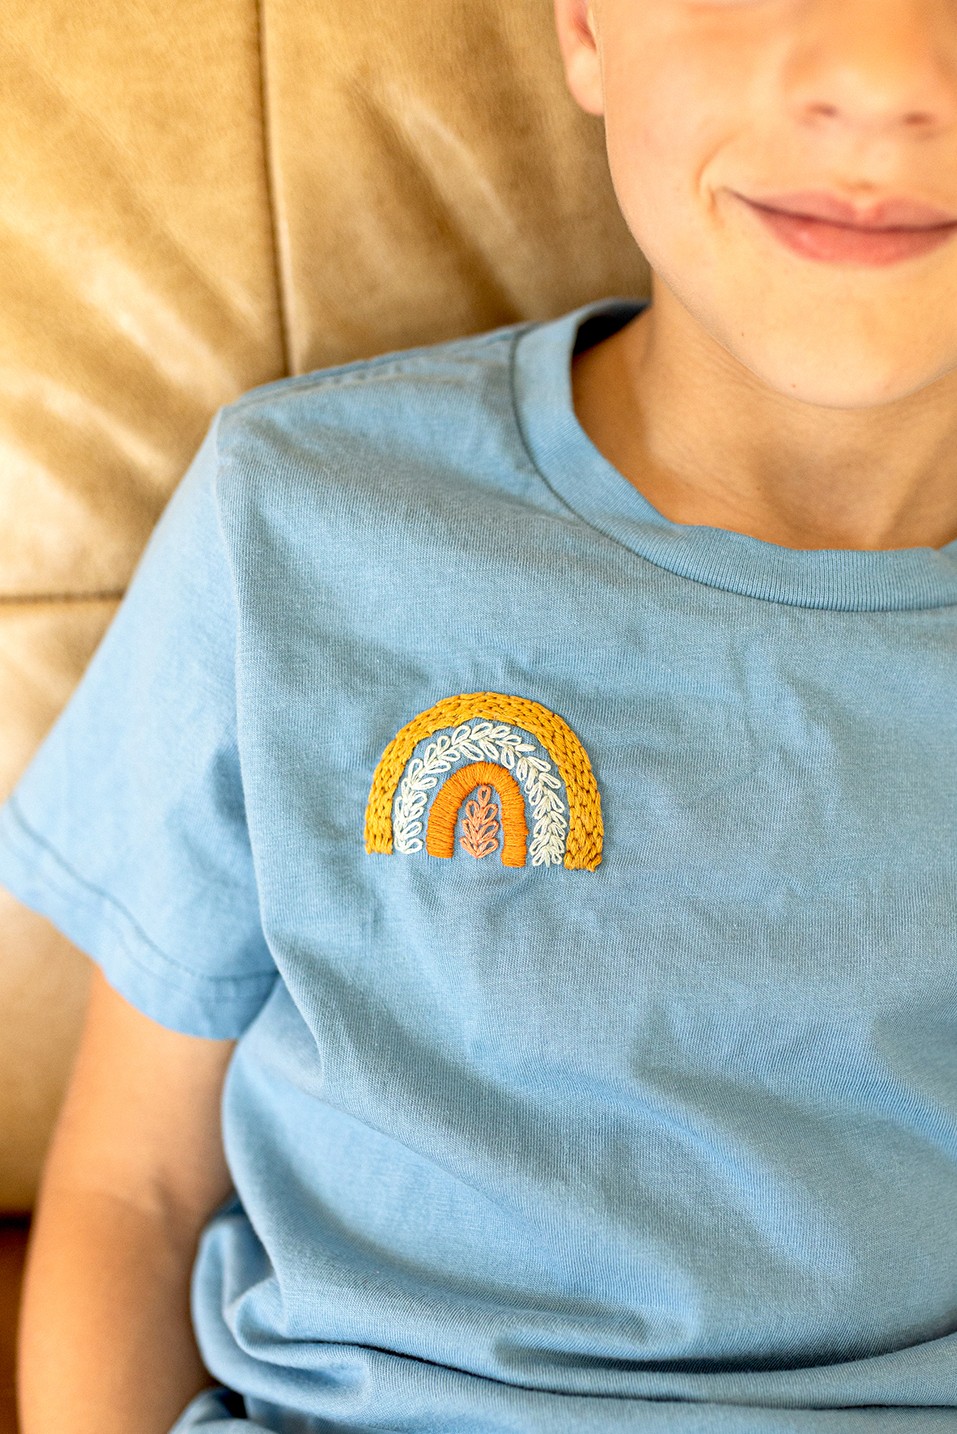 A little boy smiles, wearing a shirt with a rainbow embroidered on it.